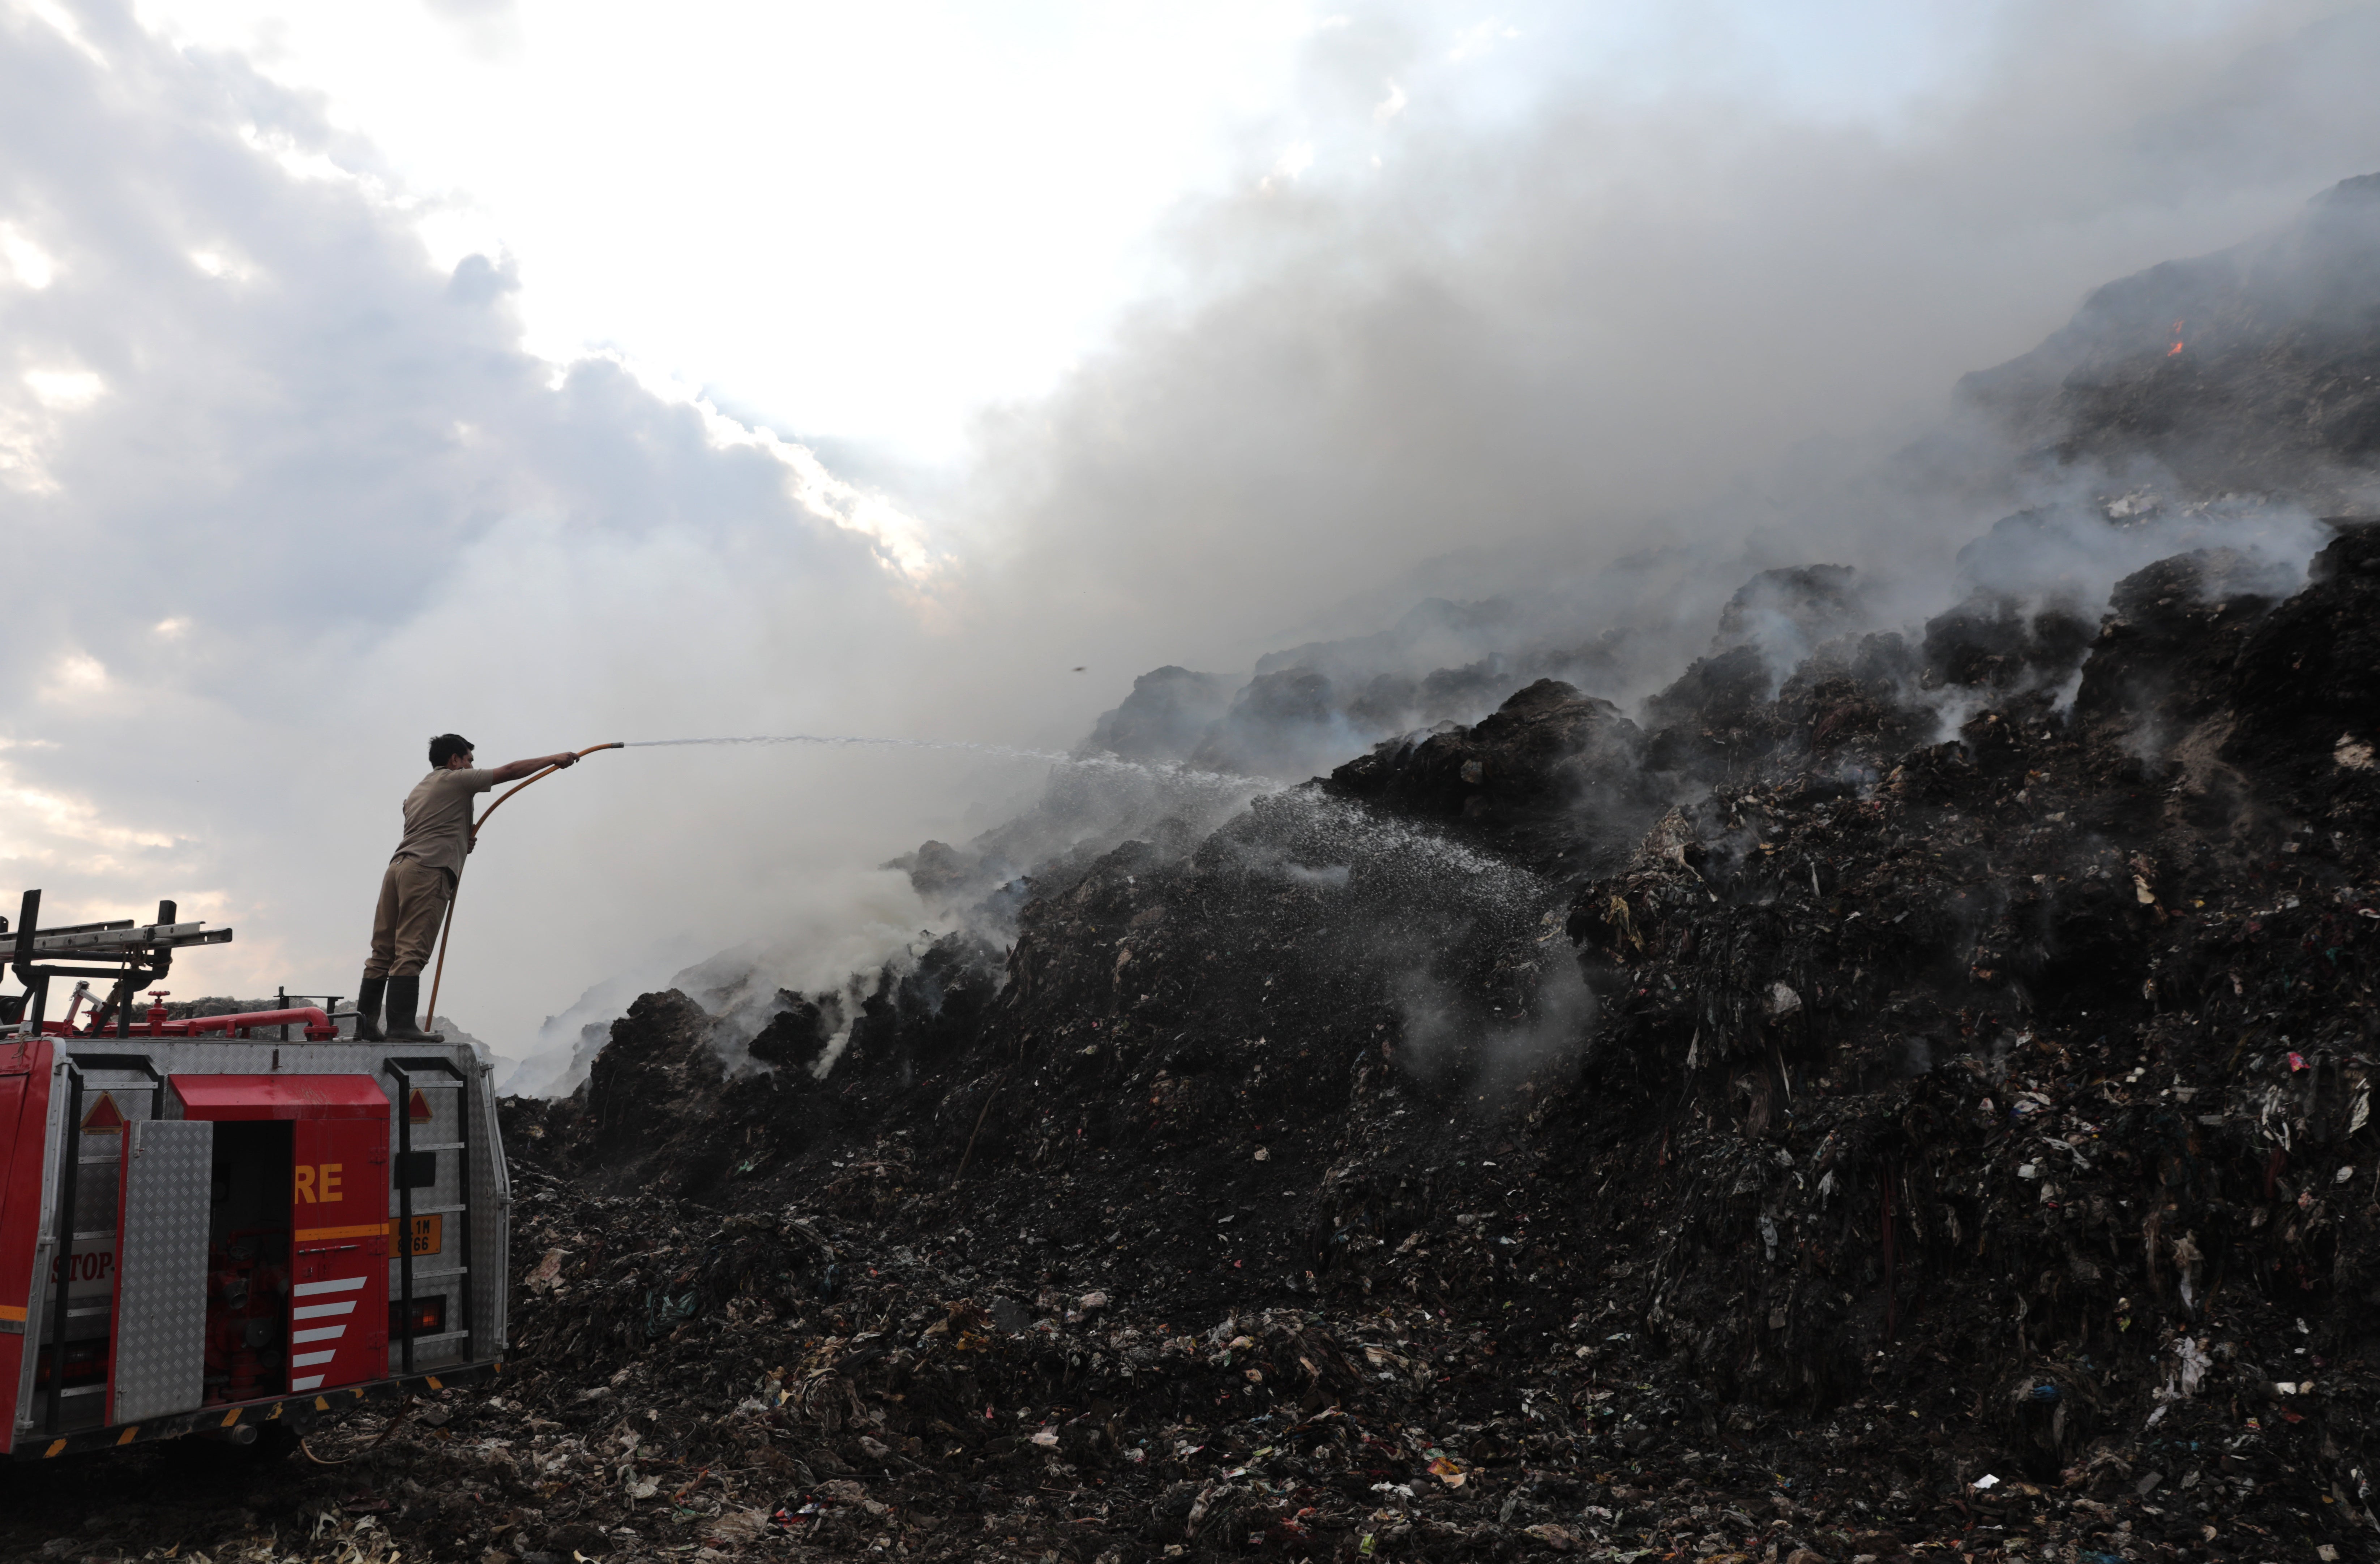 Indian firefighters work to extinguish the fire at the Ghazipur landfill